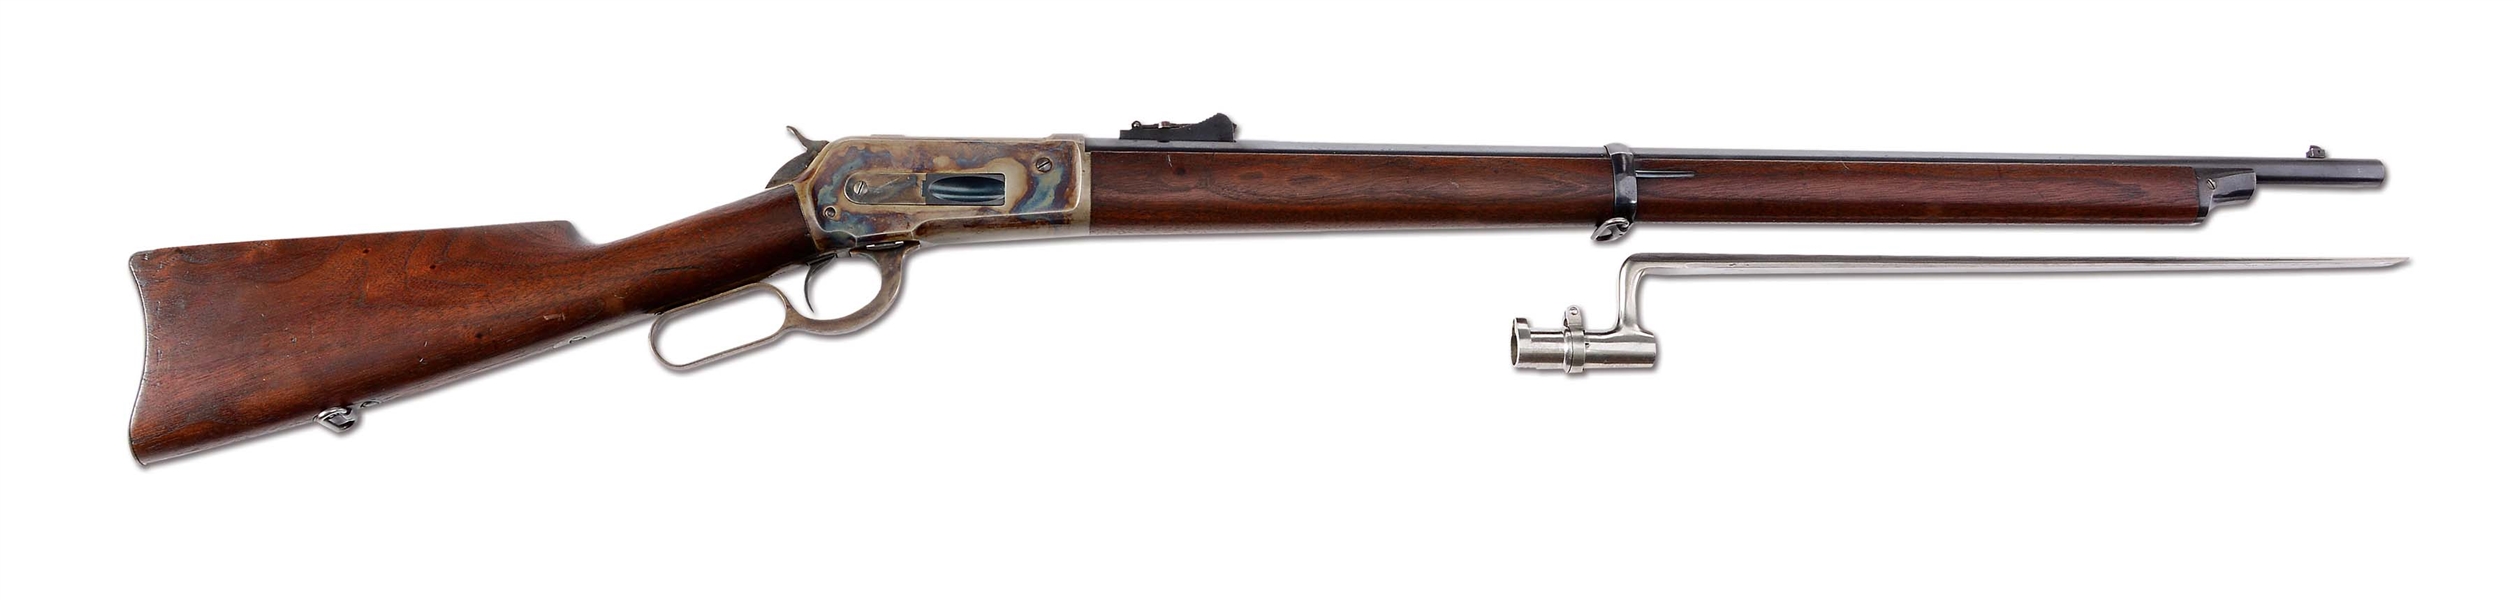 (A) RARE WINCHESTER MODEL 1886 MUSKET WITH BAYONET (1893).